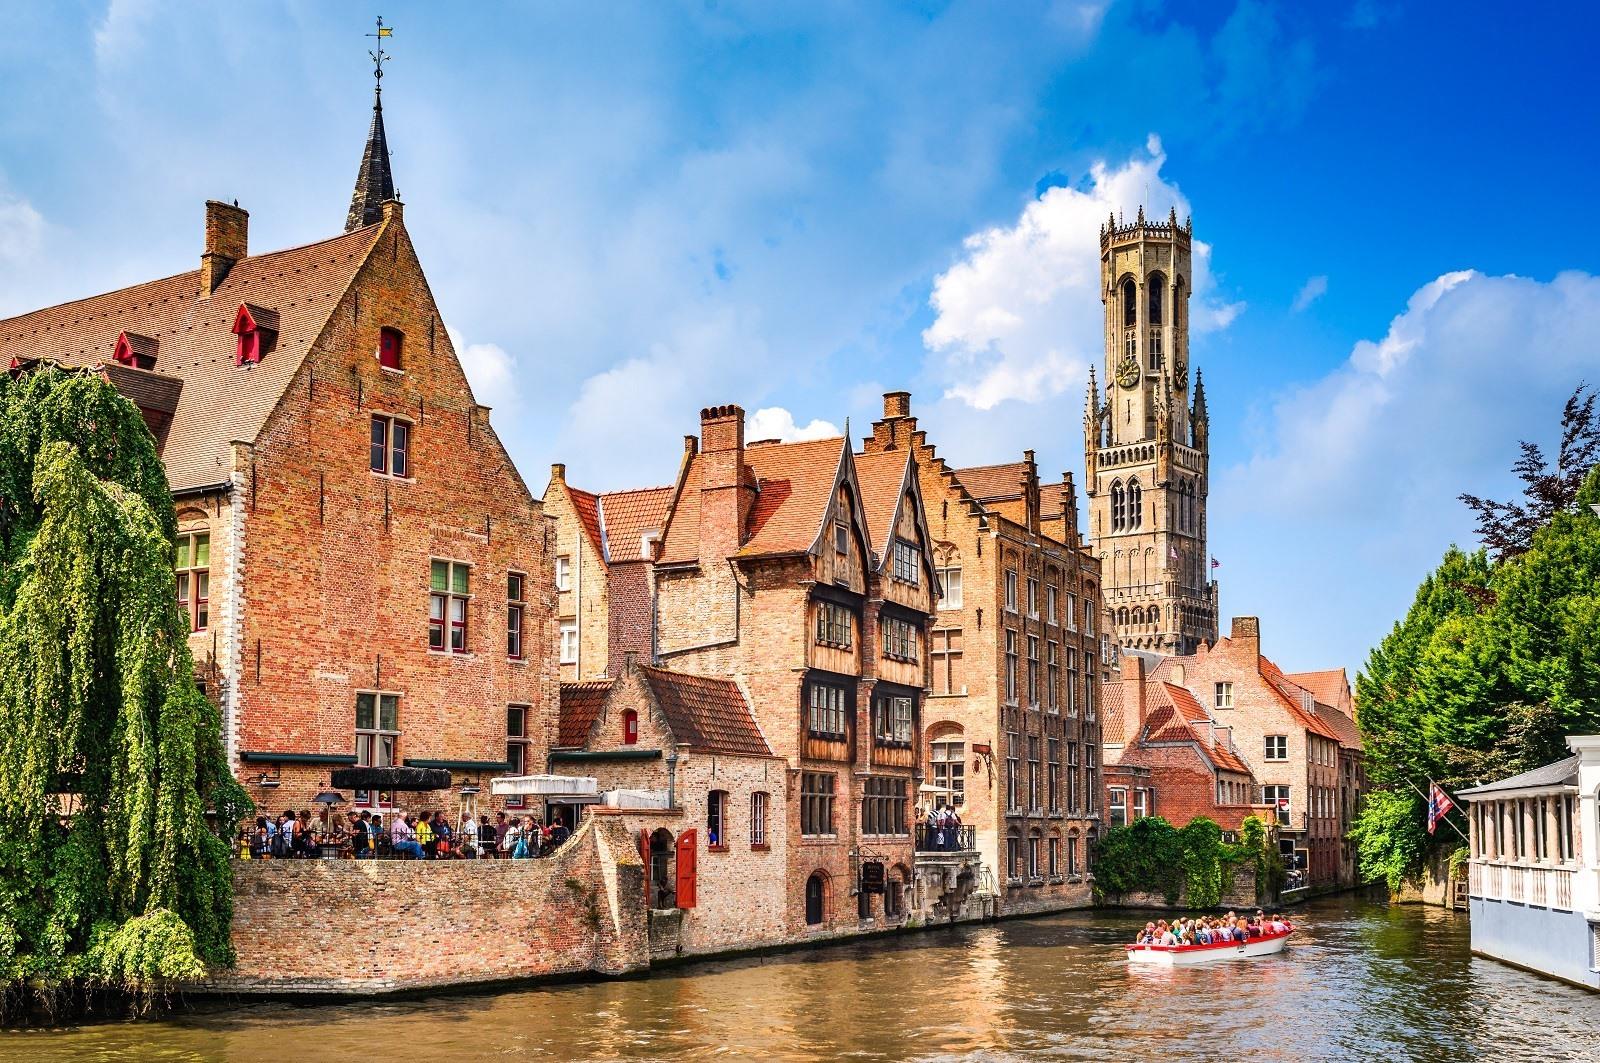 All info about Bruges: to know for visit to Bruges